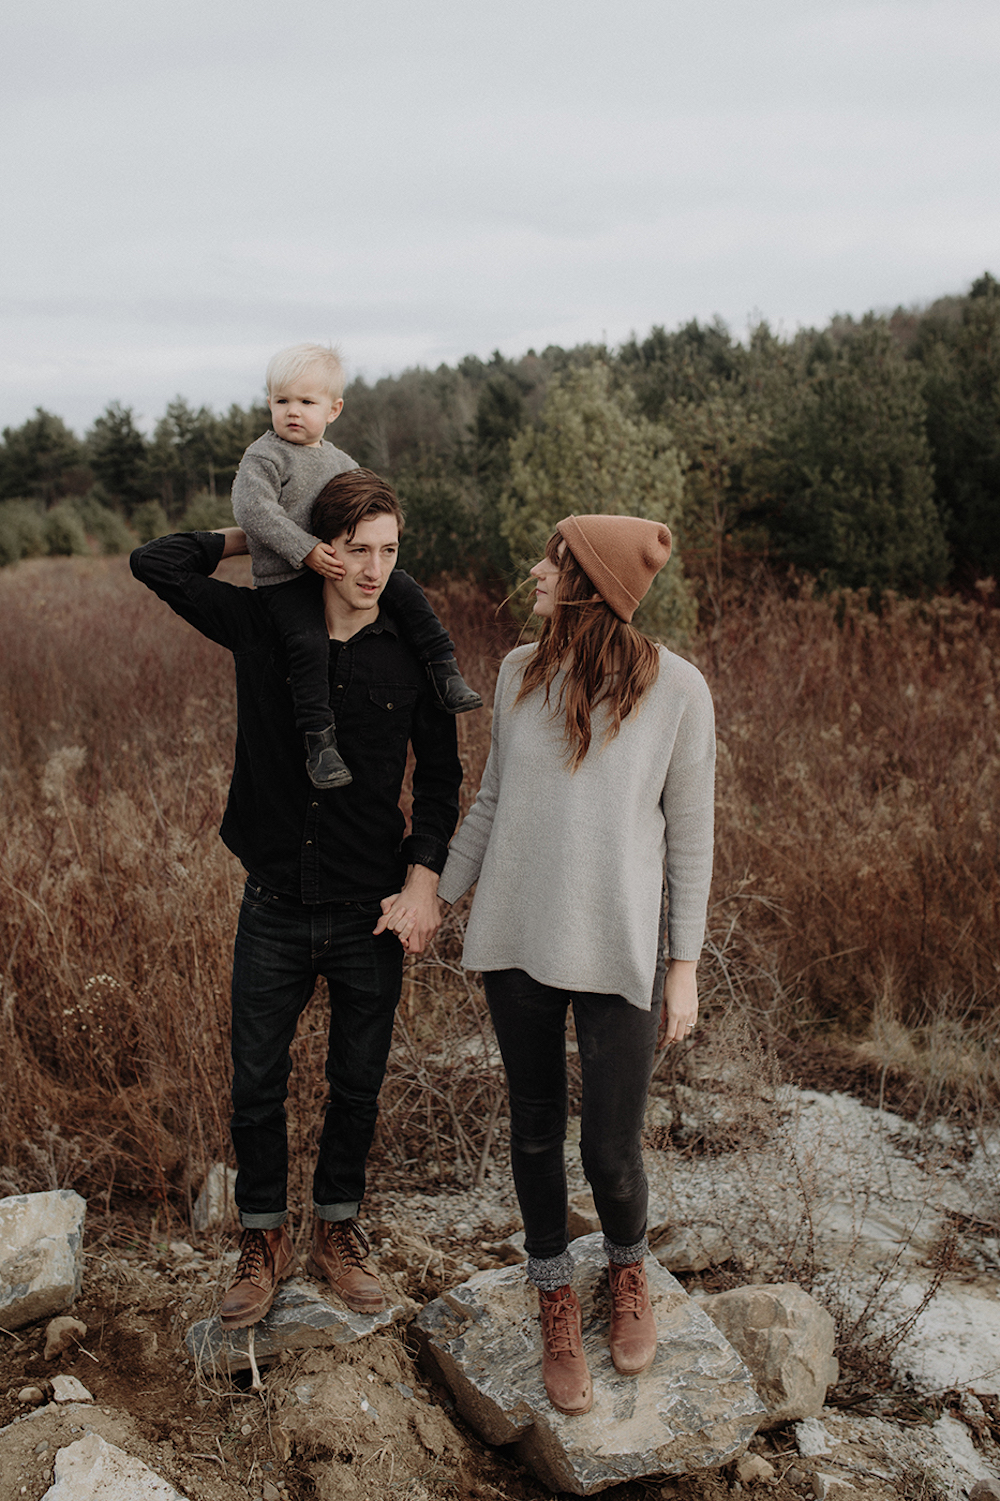 image of a family of three in the fall outdoors wearing grey knit sweaters, black pants, and lace up boots